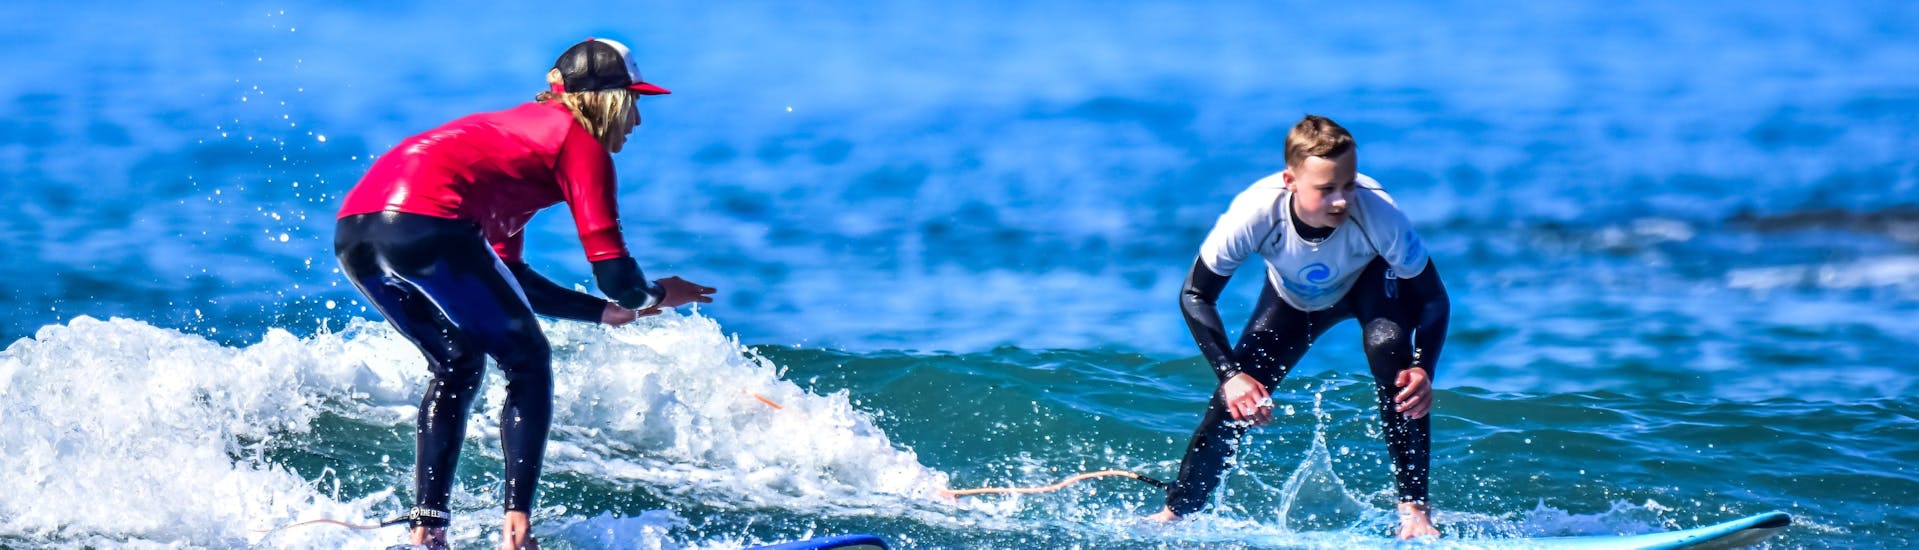 Surfing Lessons for Kids & Adults - Beginners.